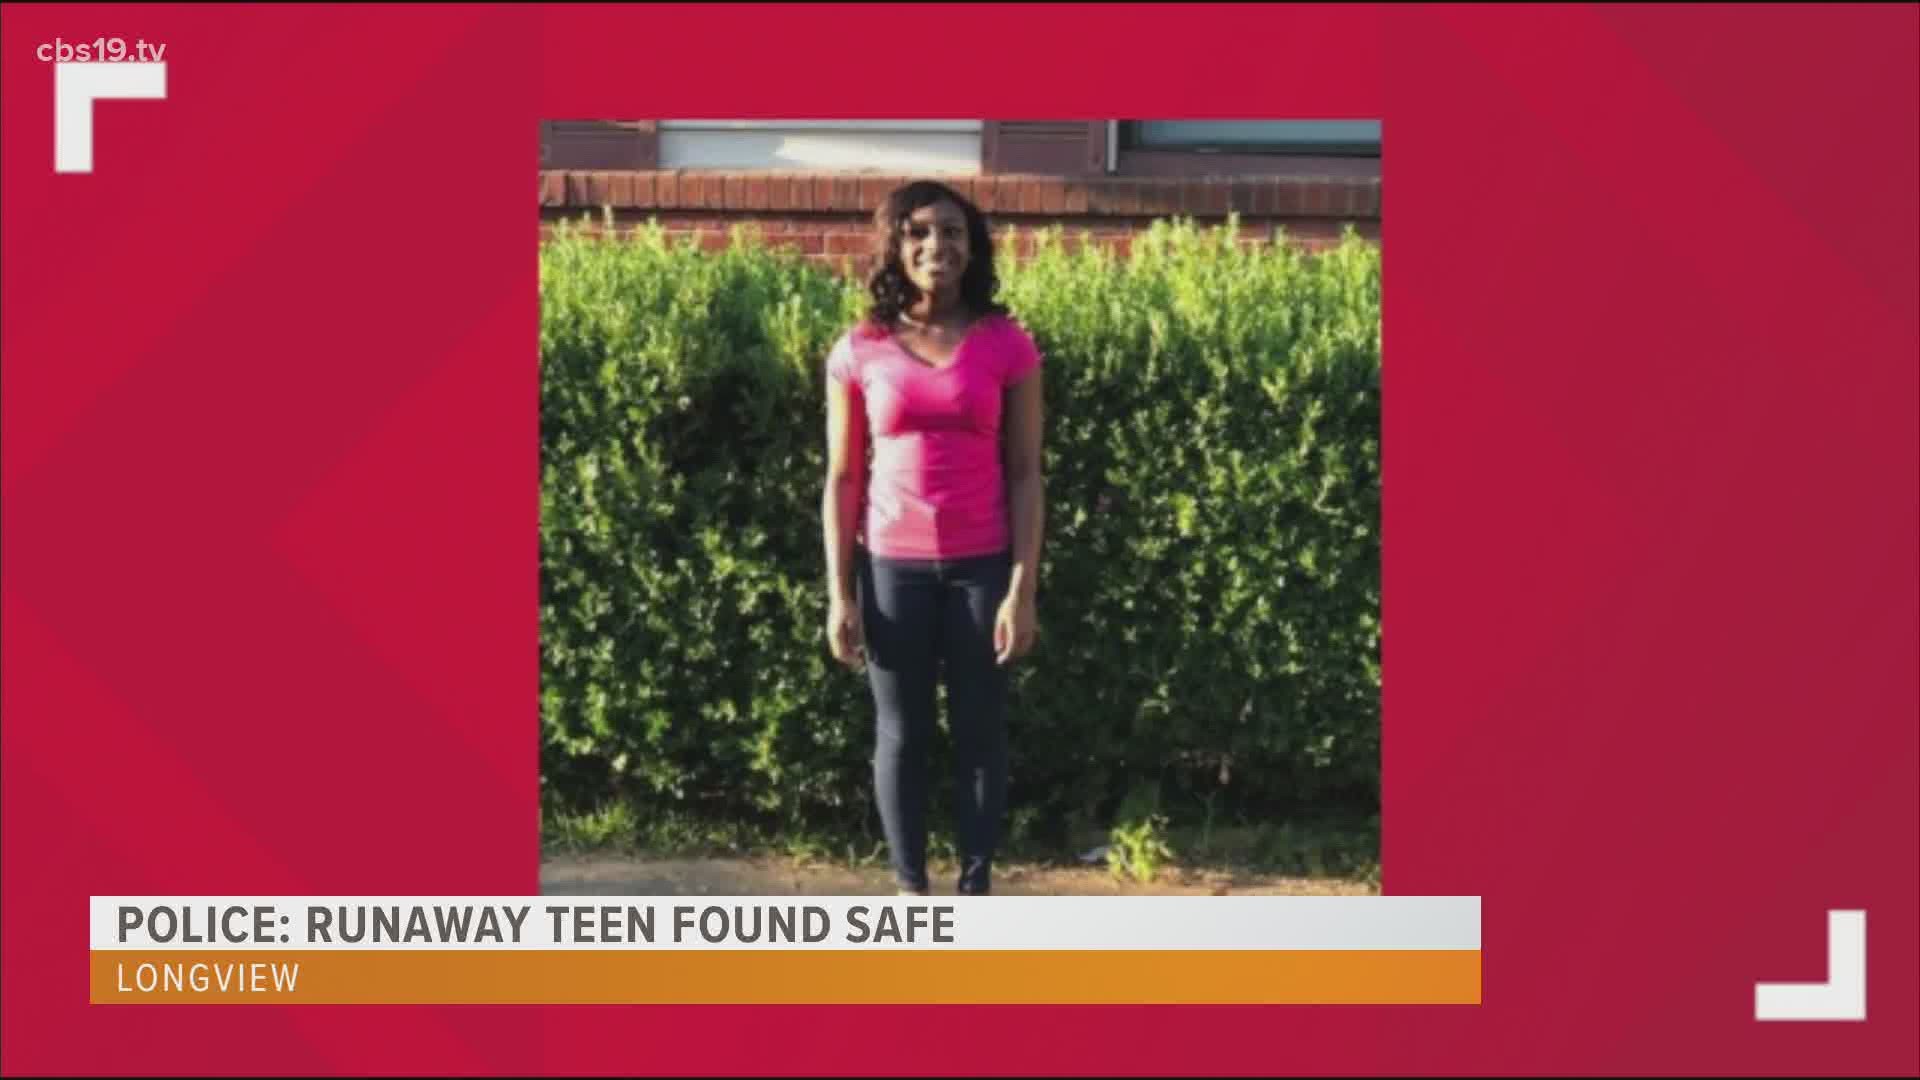 A Longview teen who was reported missing on Tuesday, Oct. 13, has been located safe.